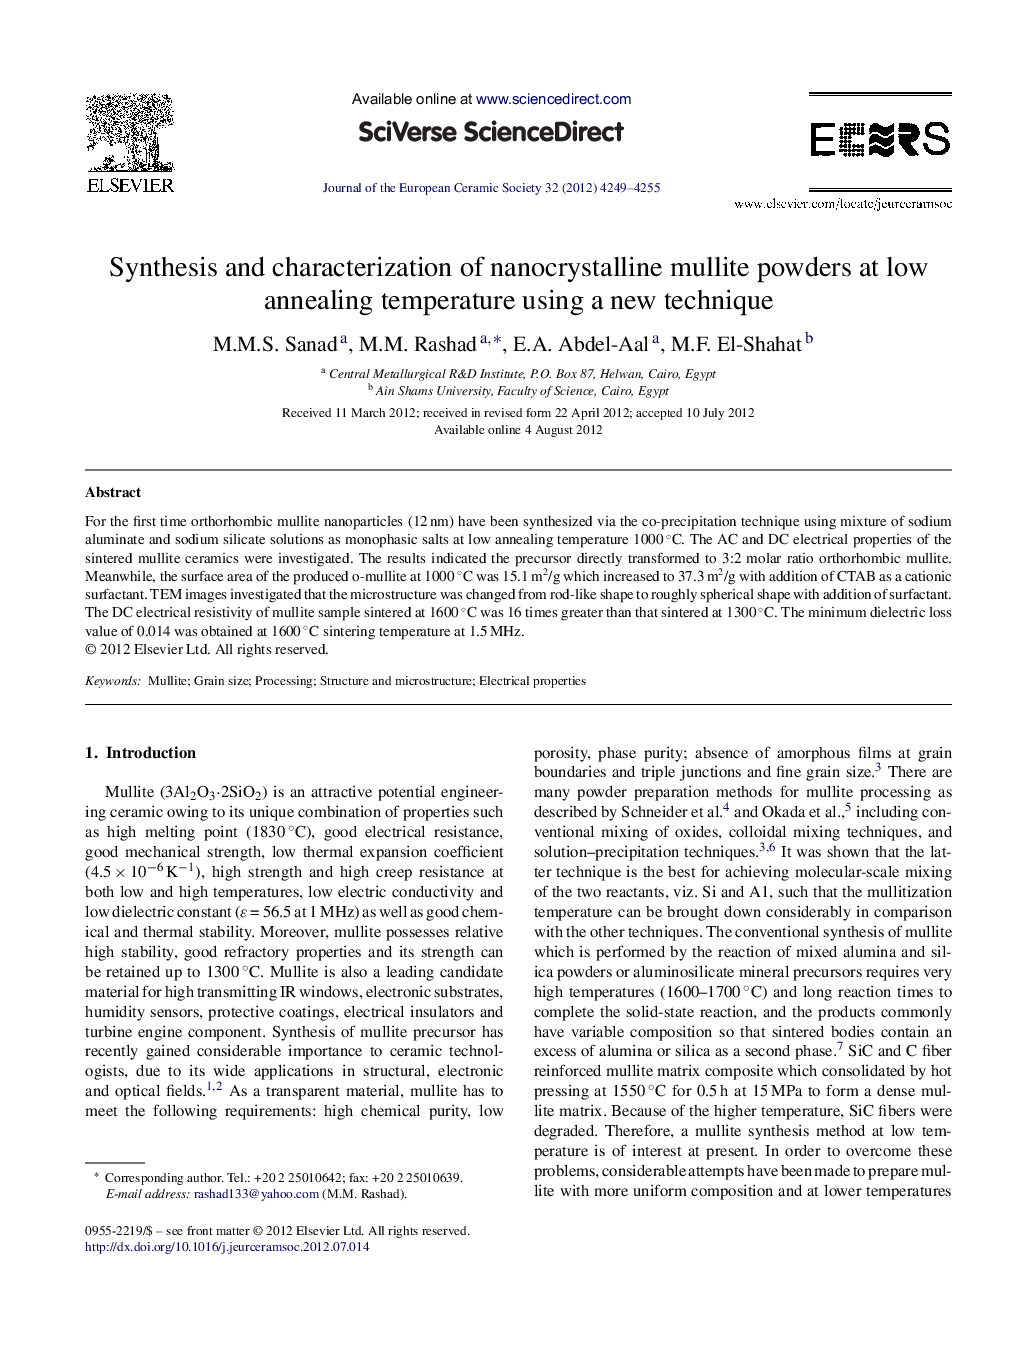 Synthesis and characterization of nanocrystalline mullite powders at low annealing temperature using a new technique